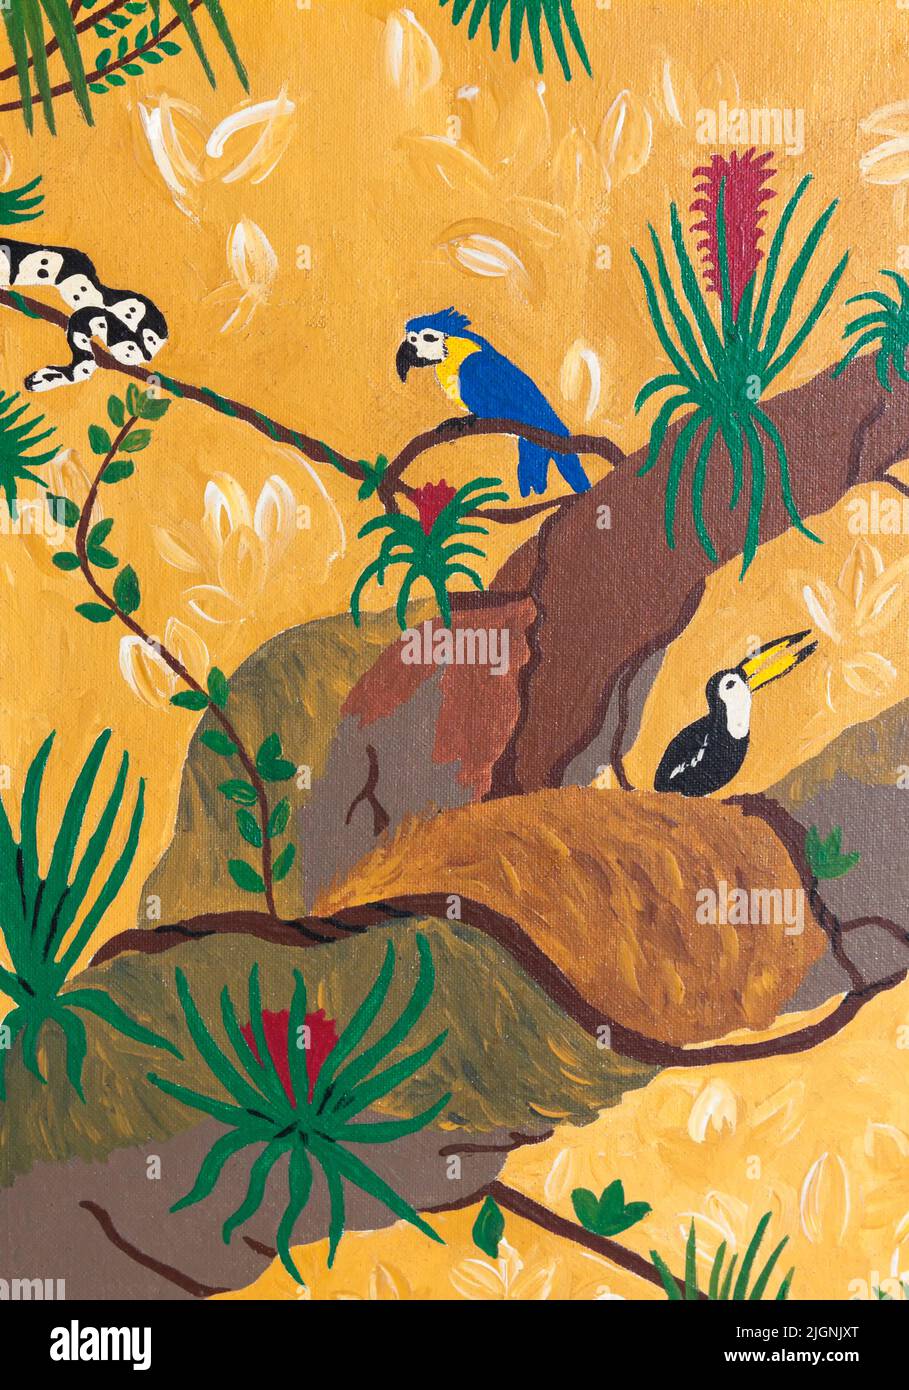 Painting jungle with birds and snake Stock Photo